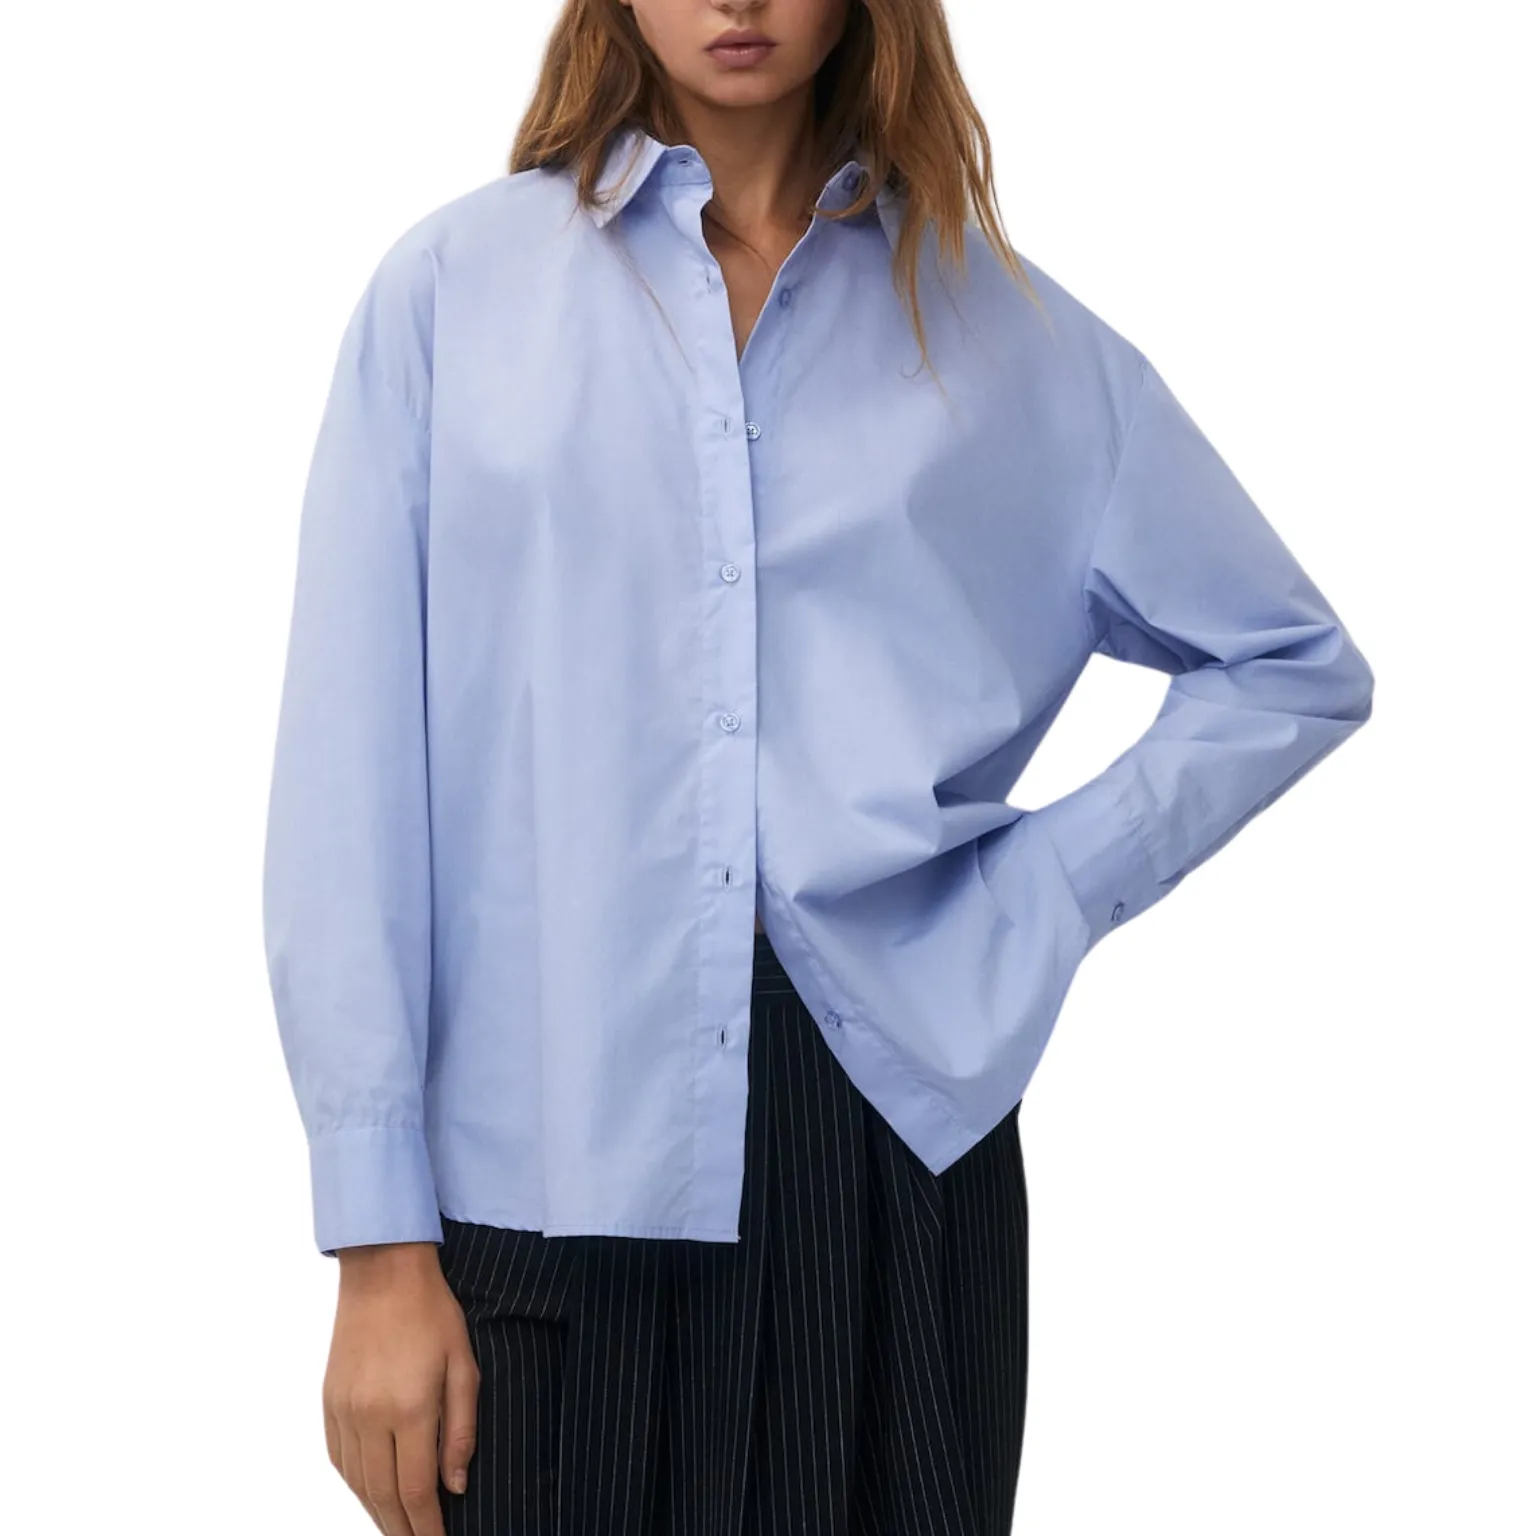 Poplin Shirts Manufacturing with ethical workplace